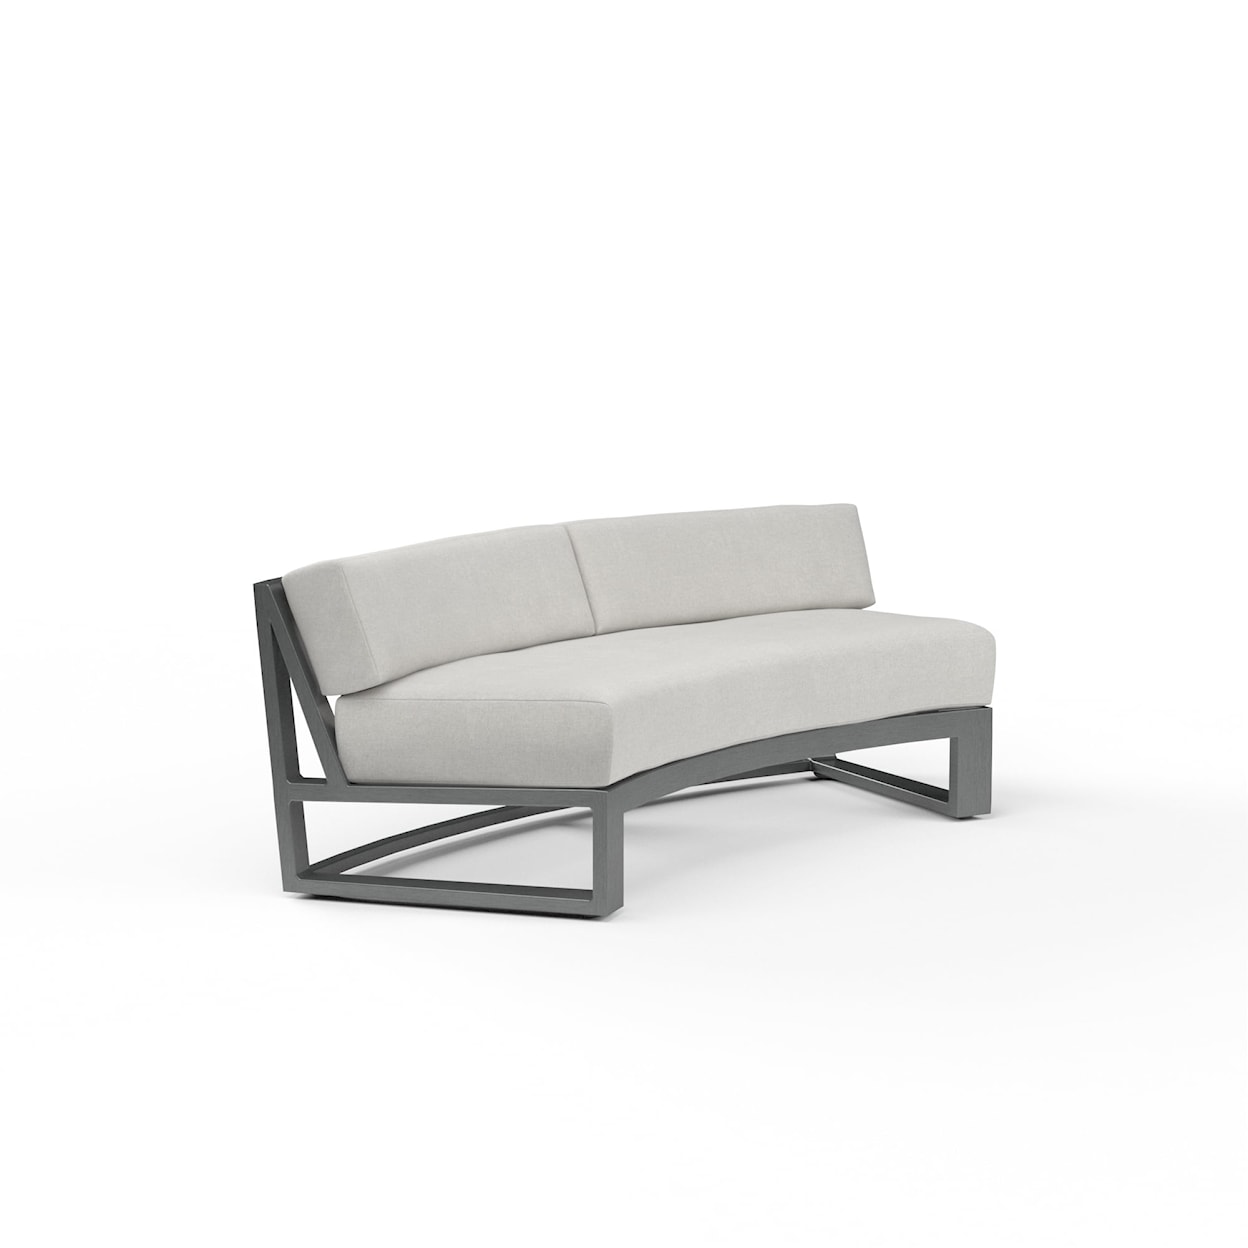 Sunset West Redondo Outdoor Curved Sofa